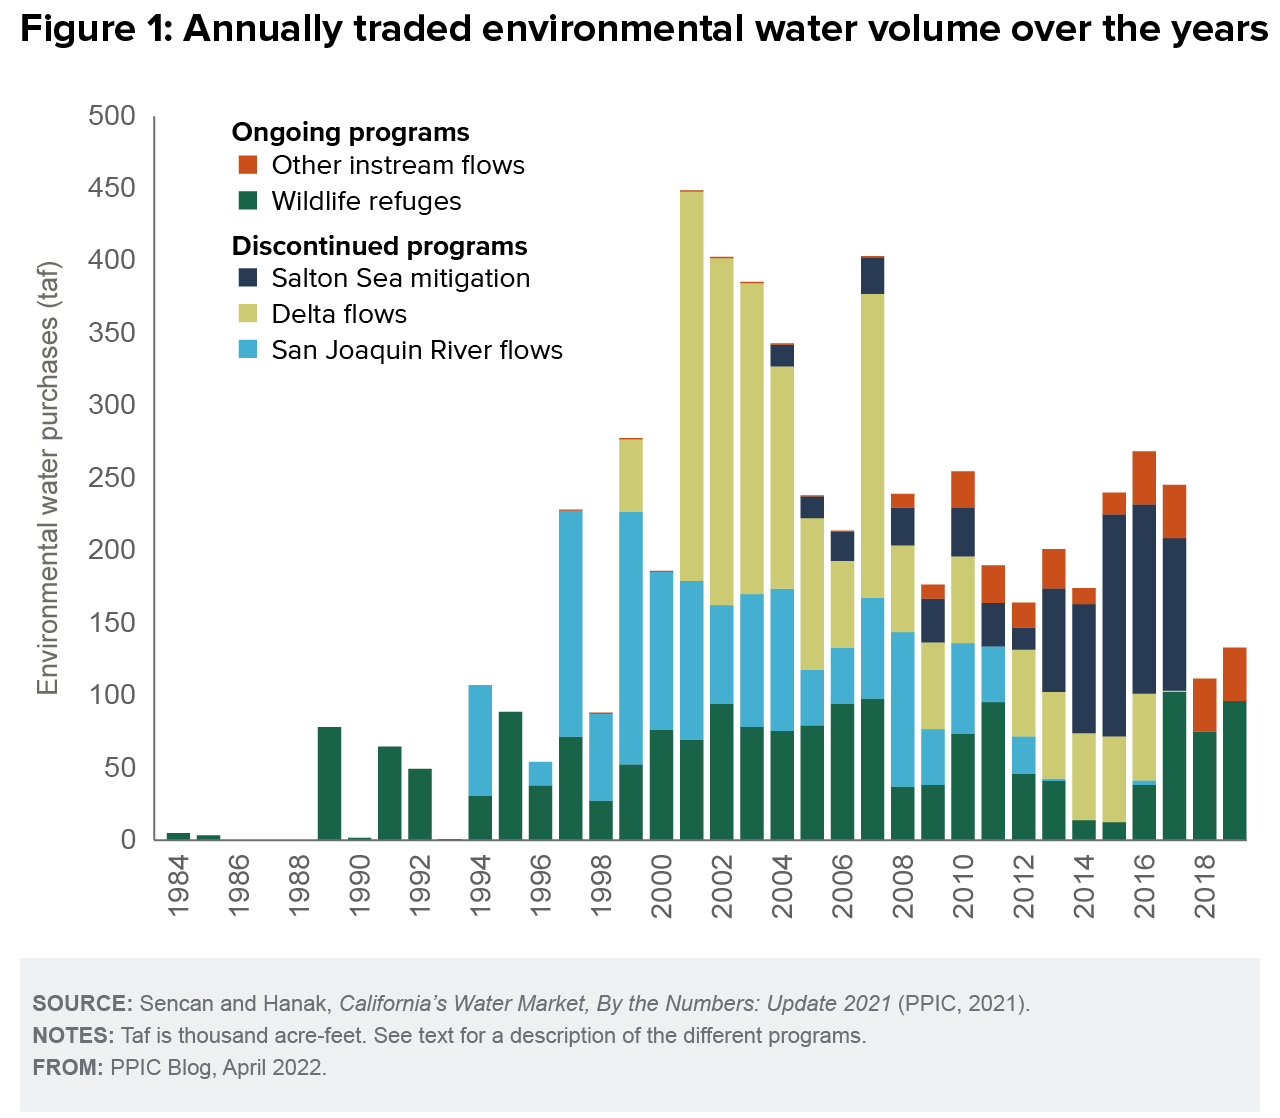 Figure - Ambient water volume traded annually over the years